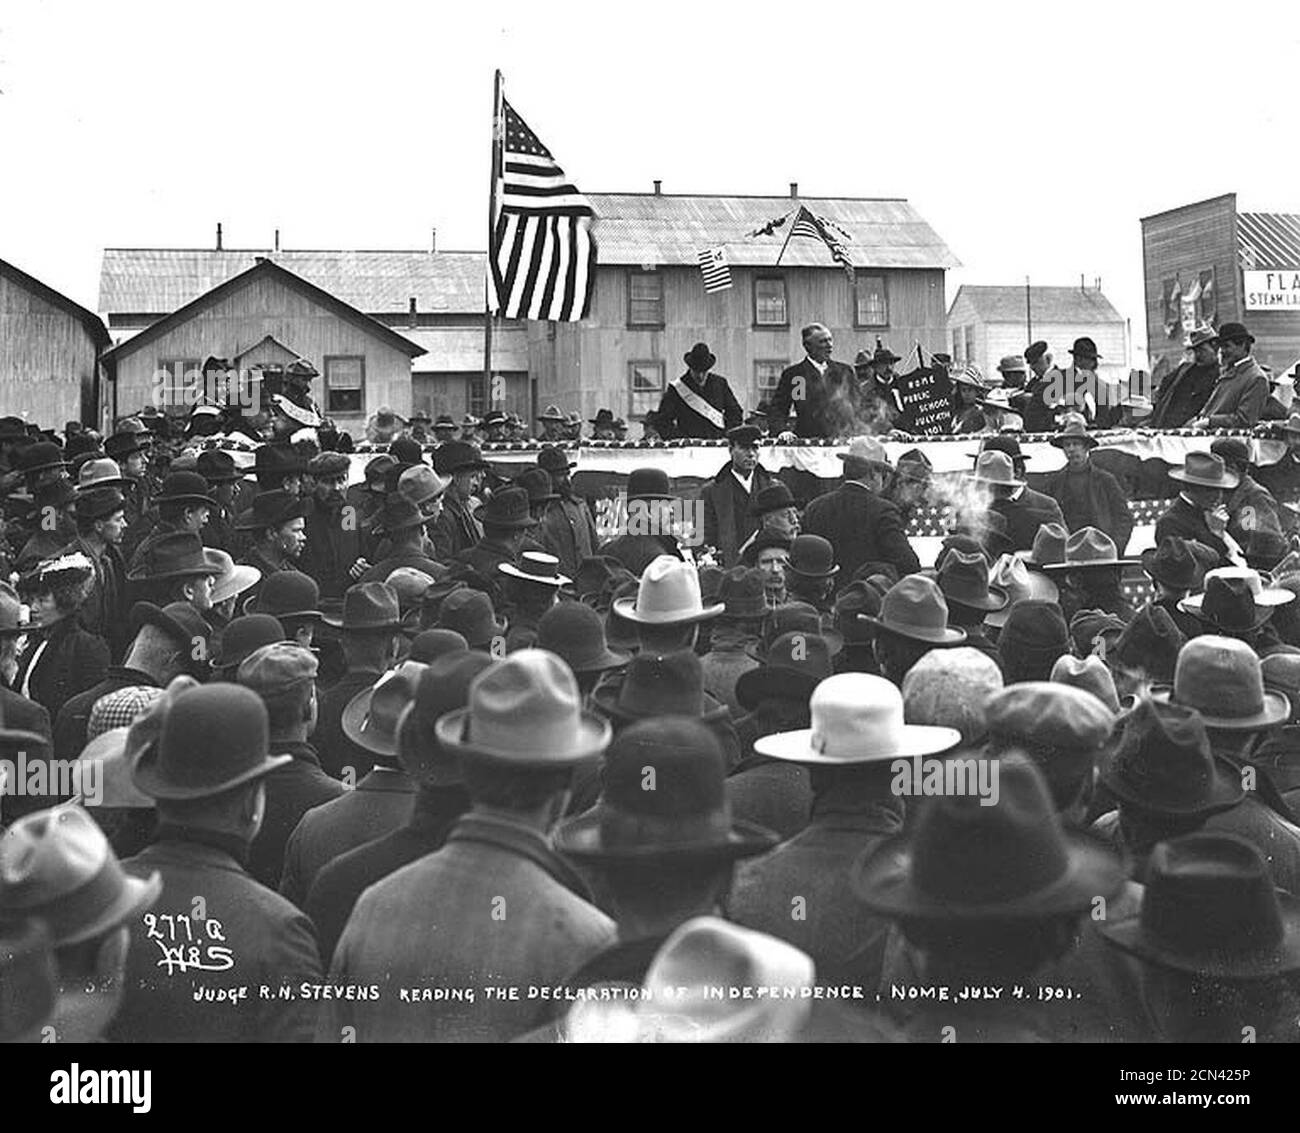 Judge RN Stevens reading the Declaration of Independence to a crowd during the July 4th celebration, Nome, Alaska, 1901 (HEGG 407). Stock Photo